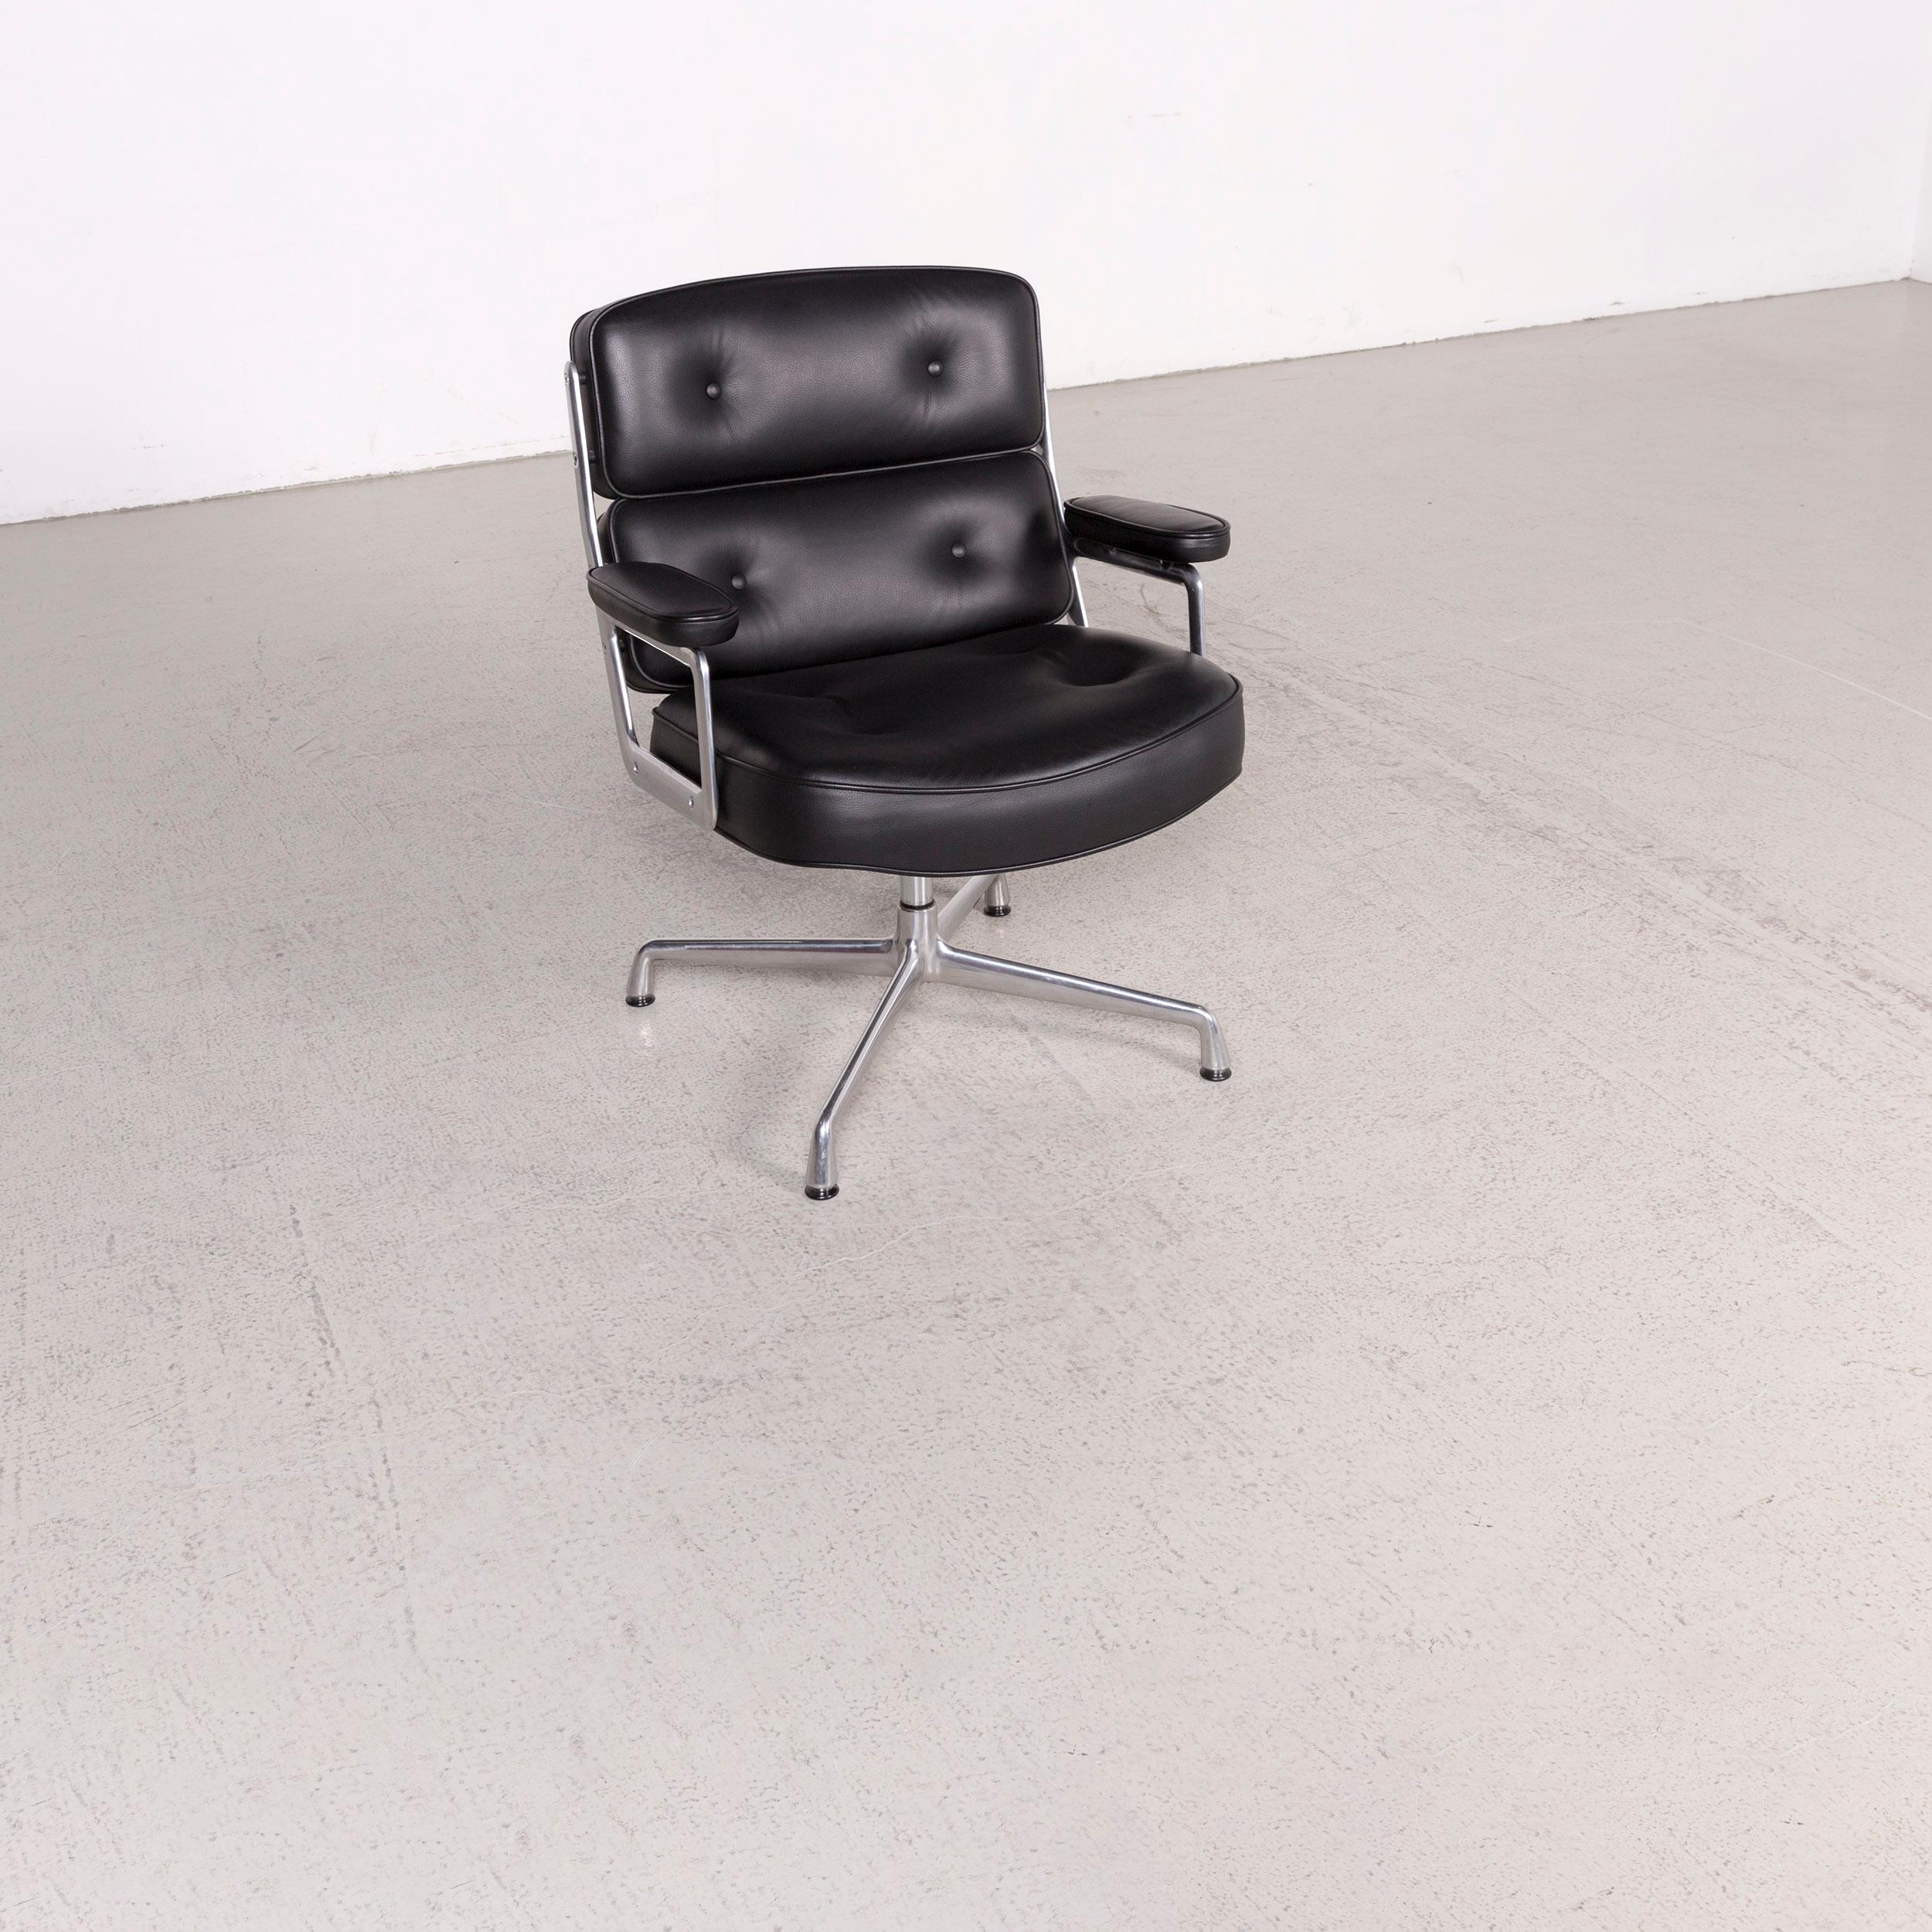 We bring to you a Vitra EA 108 lobby chair designer leather armchair black genuine leather.
 

Product measures in centimeters:

Depth: 65
Width: 65
Height: 87
Seat-height: 50
Rest-height: 60
Seat-depth: 45
Seat-width: 55
Back-height: 48.